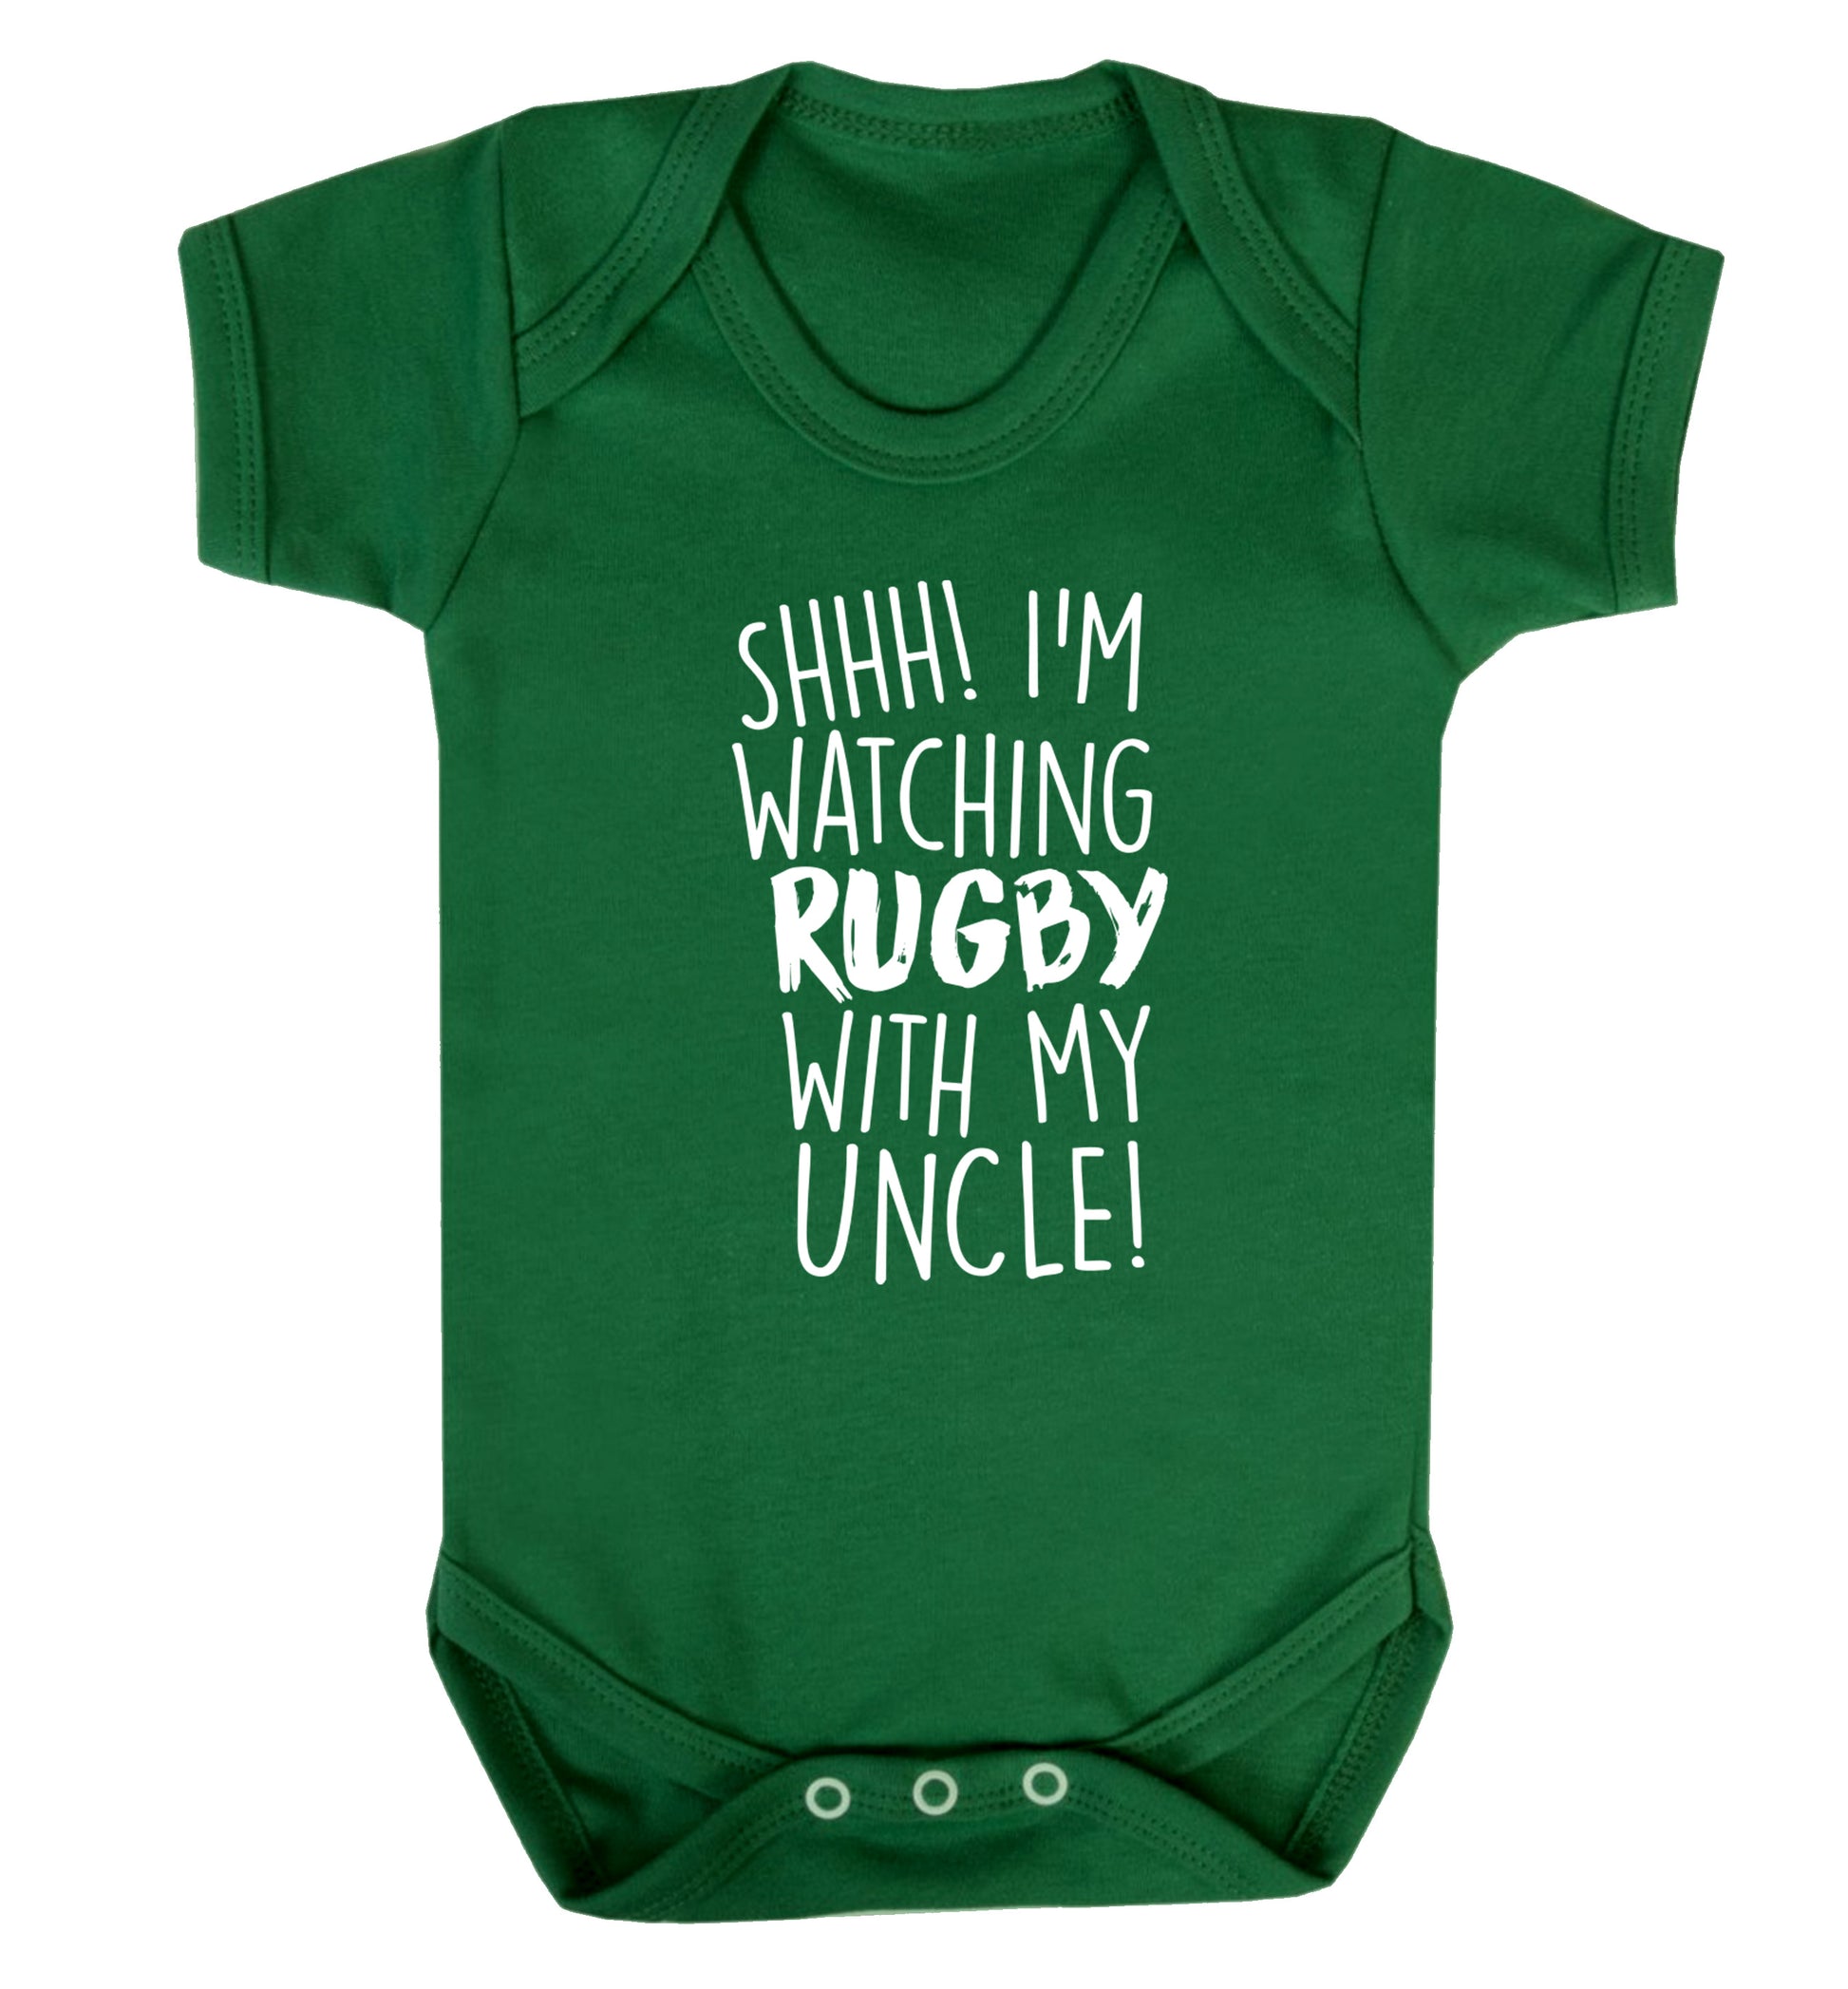 Shh.. I'm watching rugby with my uncle Baby Vest green 18-24 months